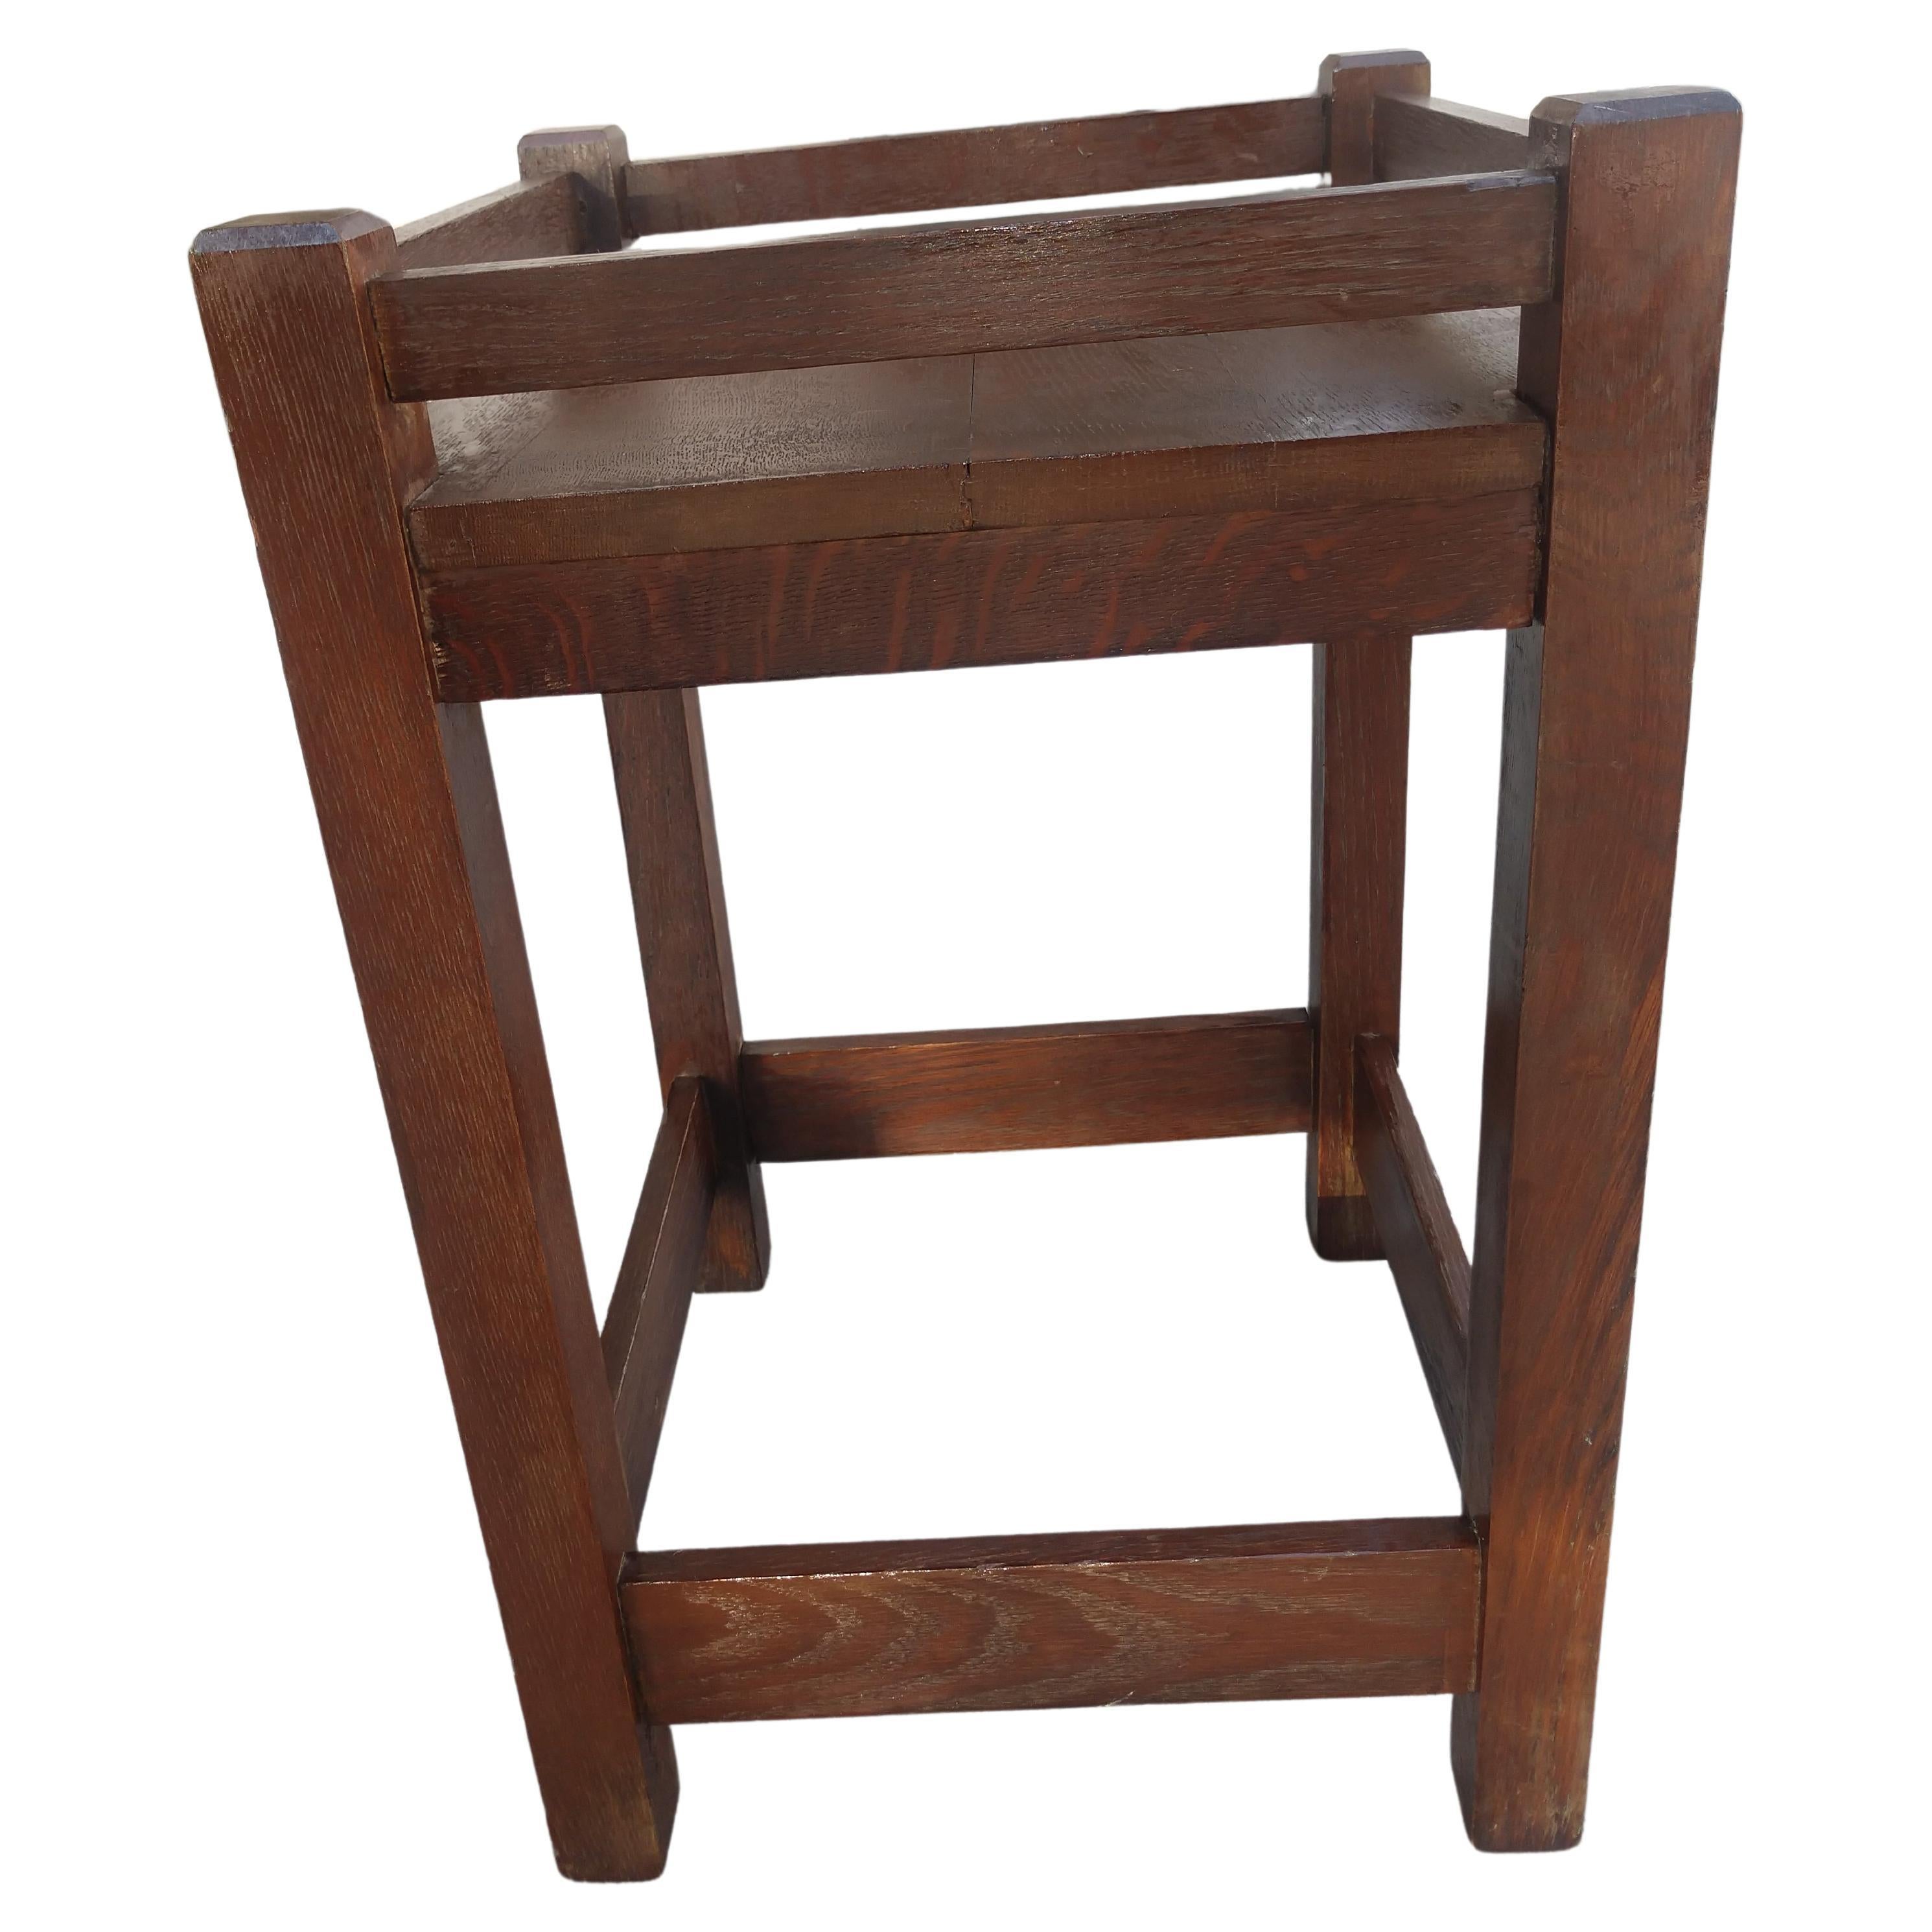 Arts & Crafts Period Mission oak plant stand. Belived to be Stickley Brothers C1910. Well constructed and in excellent vintage condition with minimal wear. Was recently oiled.